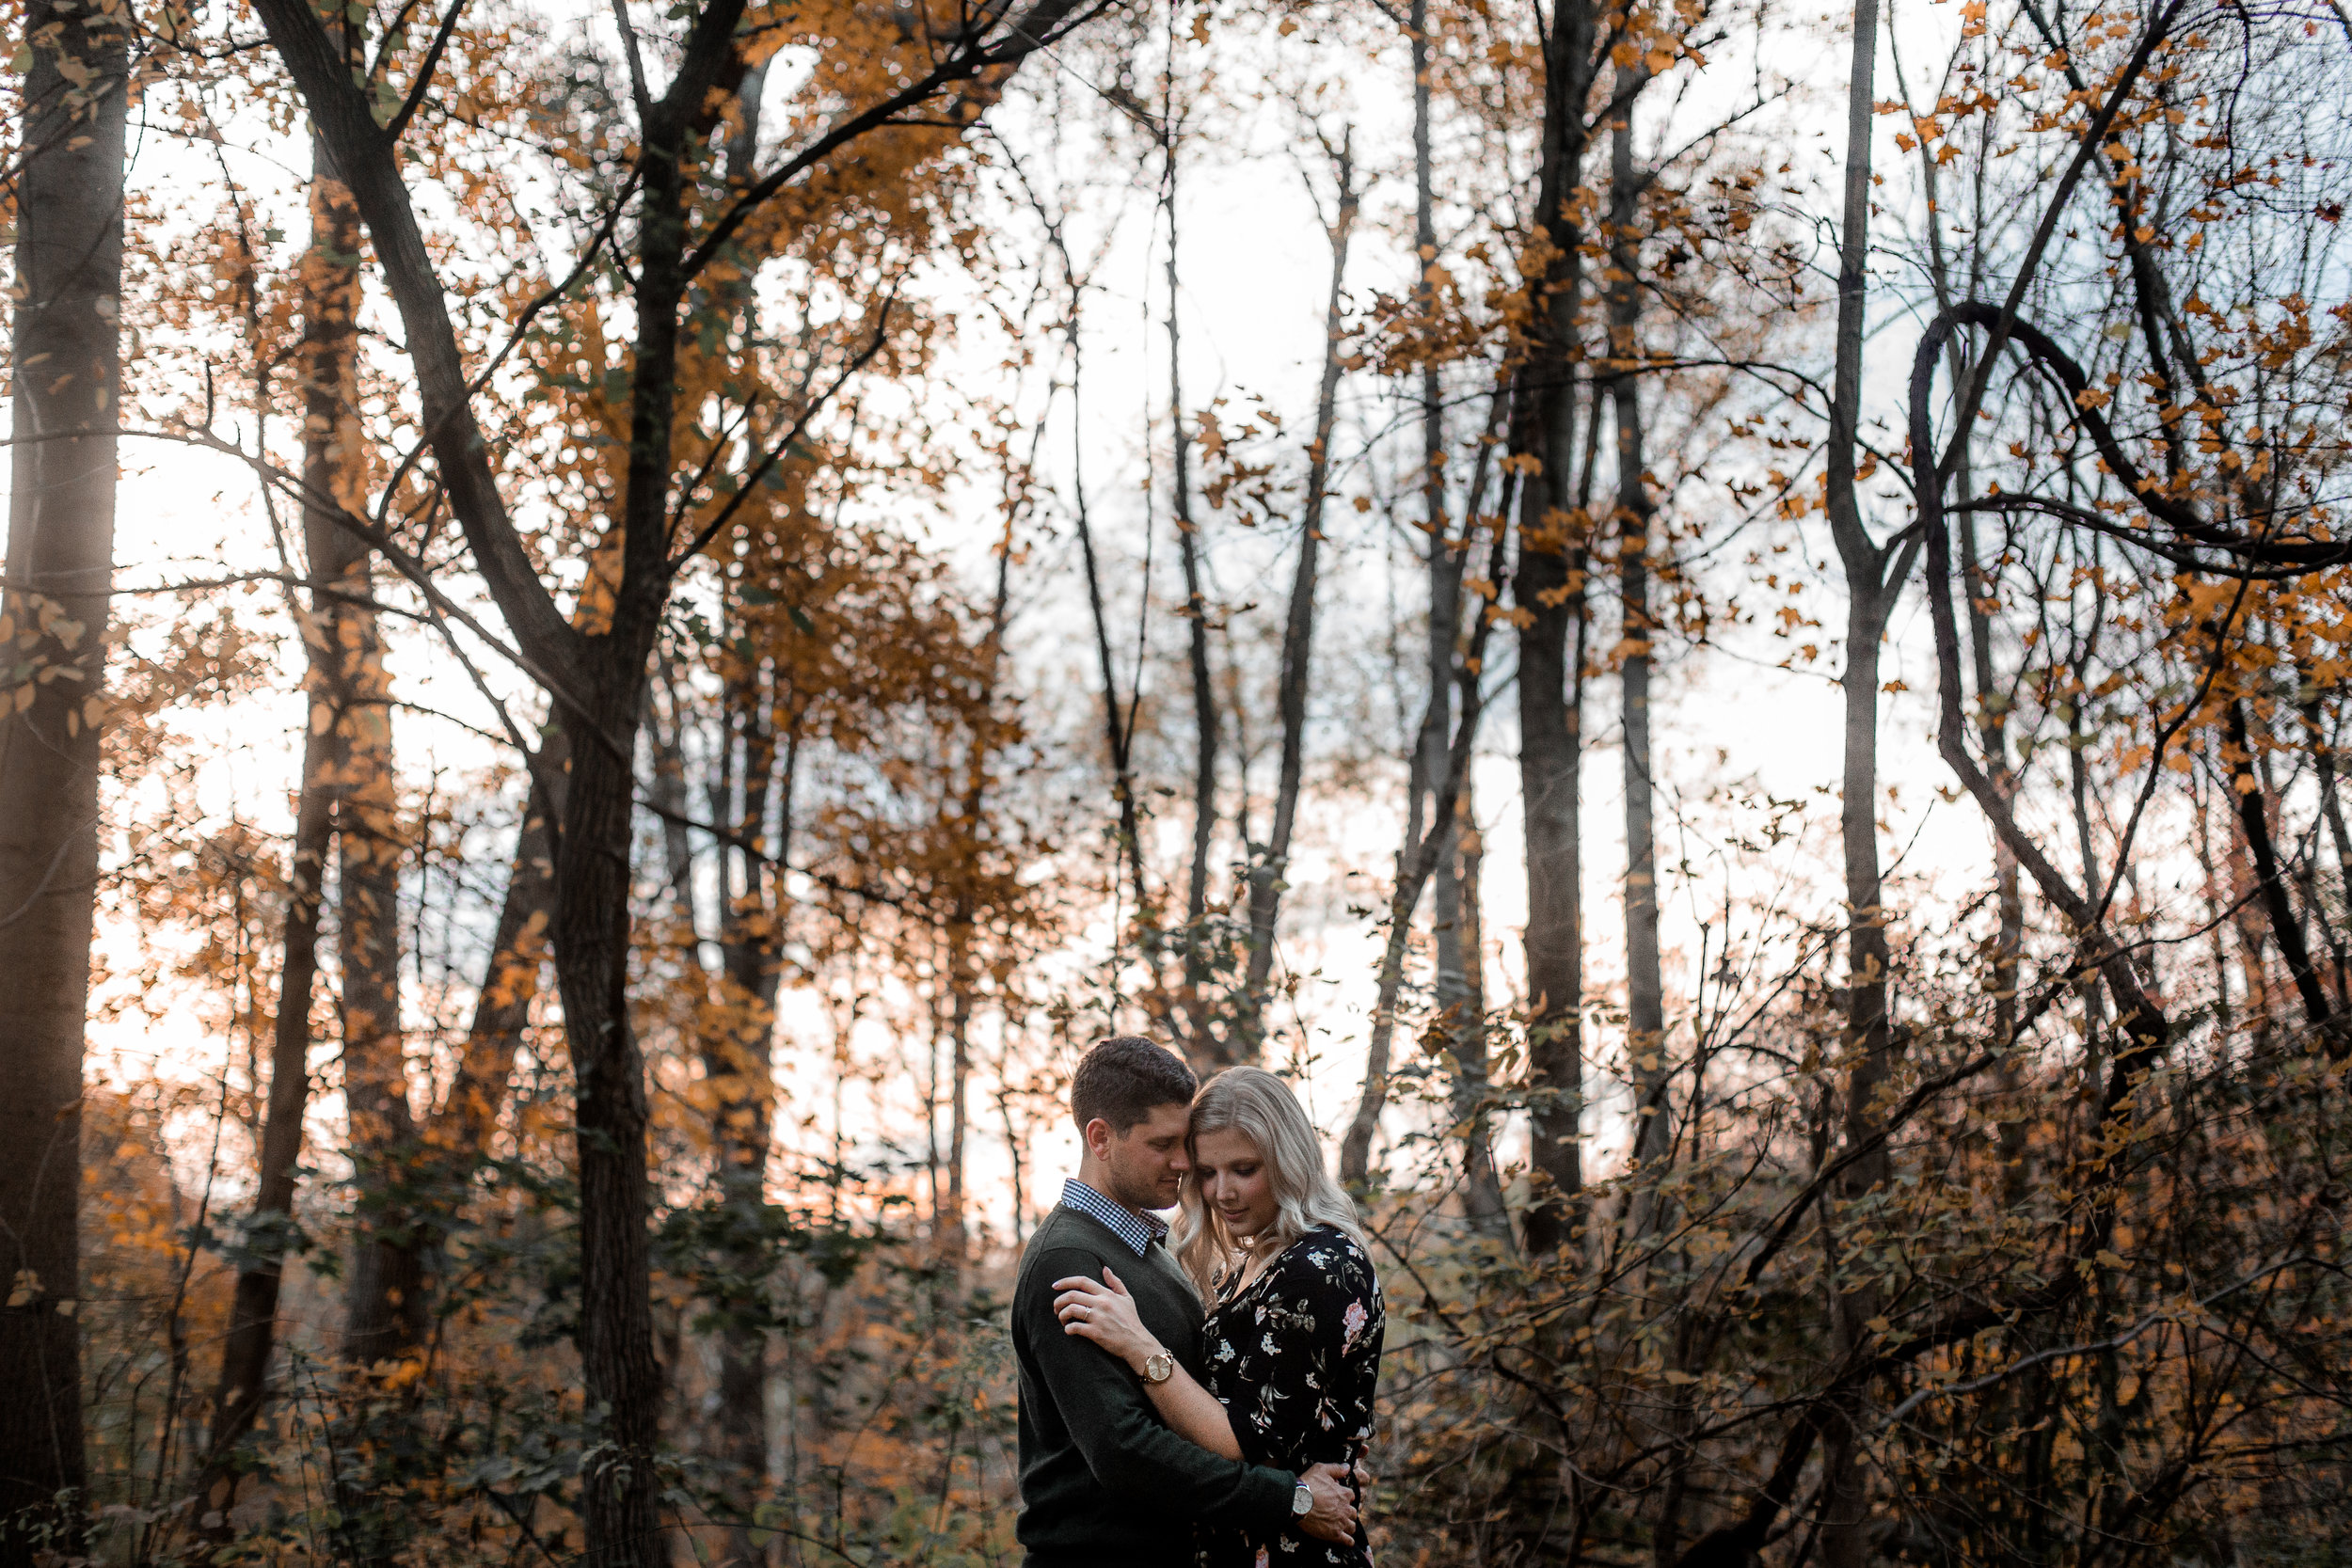 nicole-daacke-photography-carefree-bohemian-lancaster-pa-pennsylvania-engagement-photos-engagement-session-golden-sunset-adventure-session-in-lancaster-pa-lancaster-pa-outdoor-wedding-photographer-58.jpg